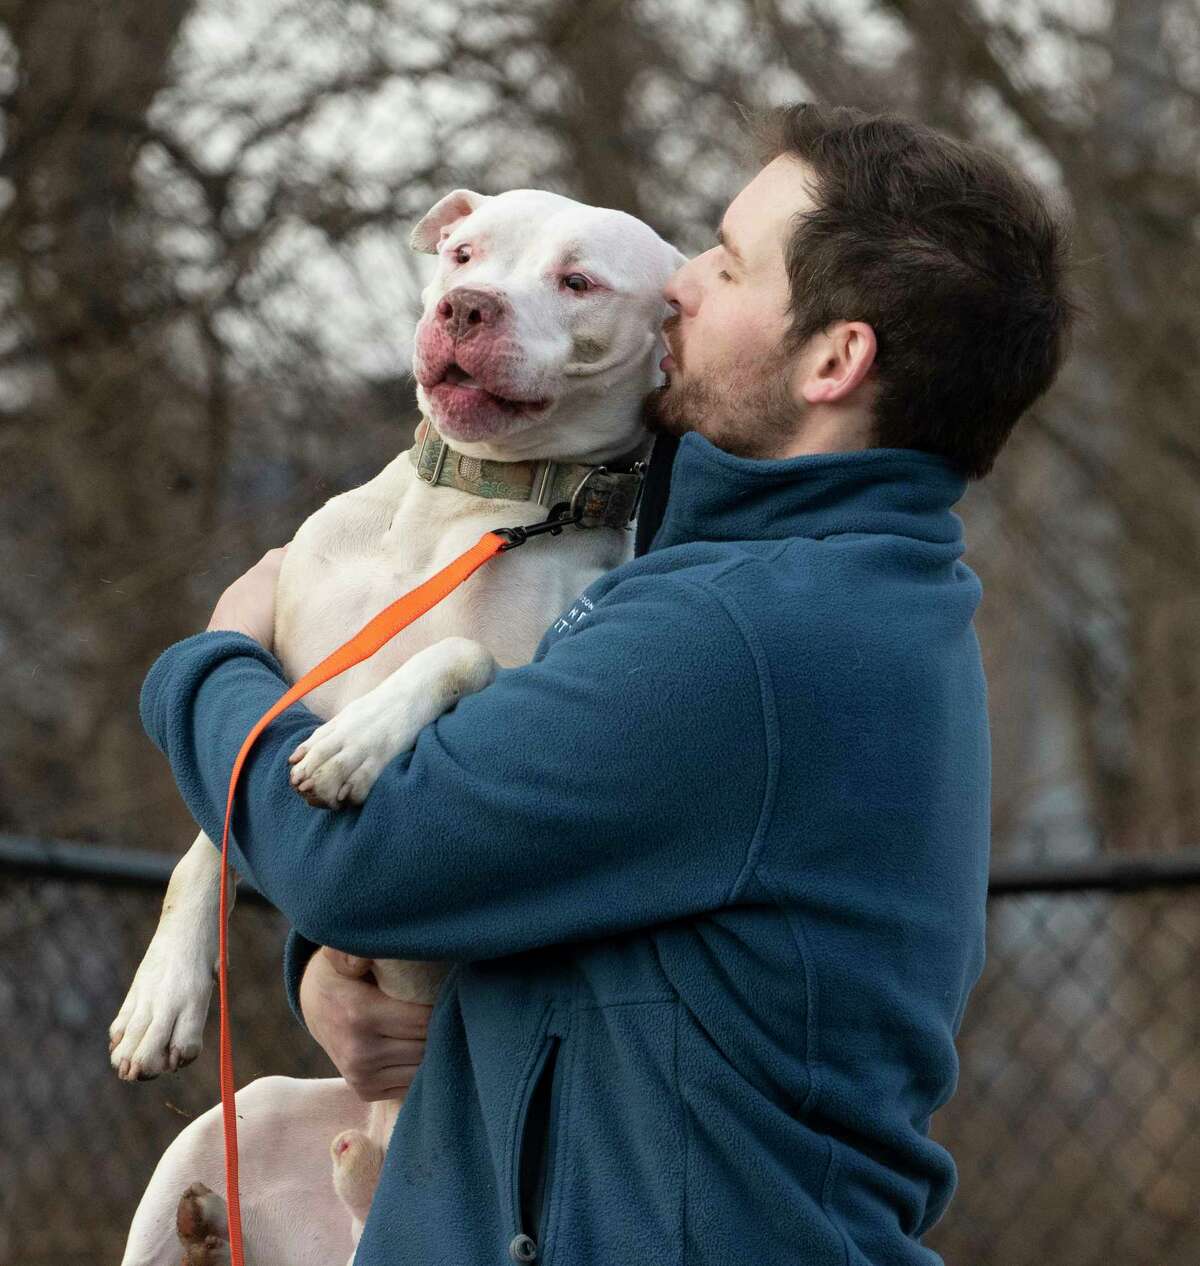 Shelter employee Michael Lansing Jr. picks up and gives mixed breed dog Vail a kiss as he gives him some outside time at the Mohawk Hudson Humane Society on Thursday, Jan. 6, 2022 in Menands, N.Y.